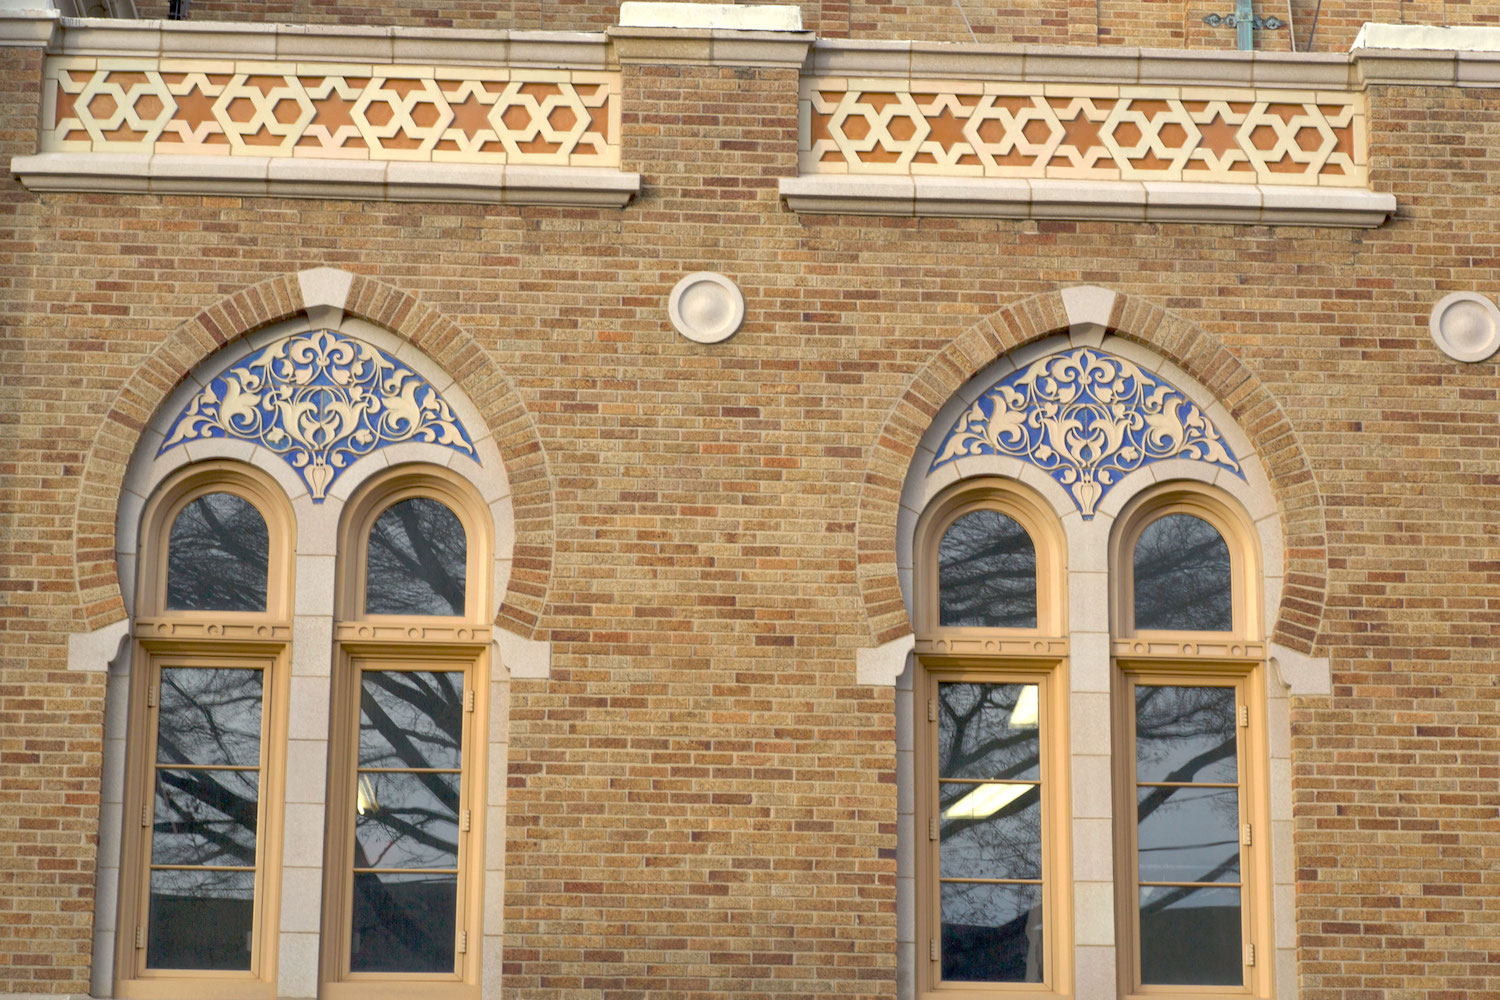 Detail view of arched and decorated windows